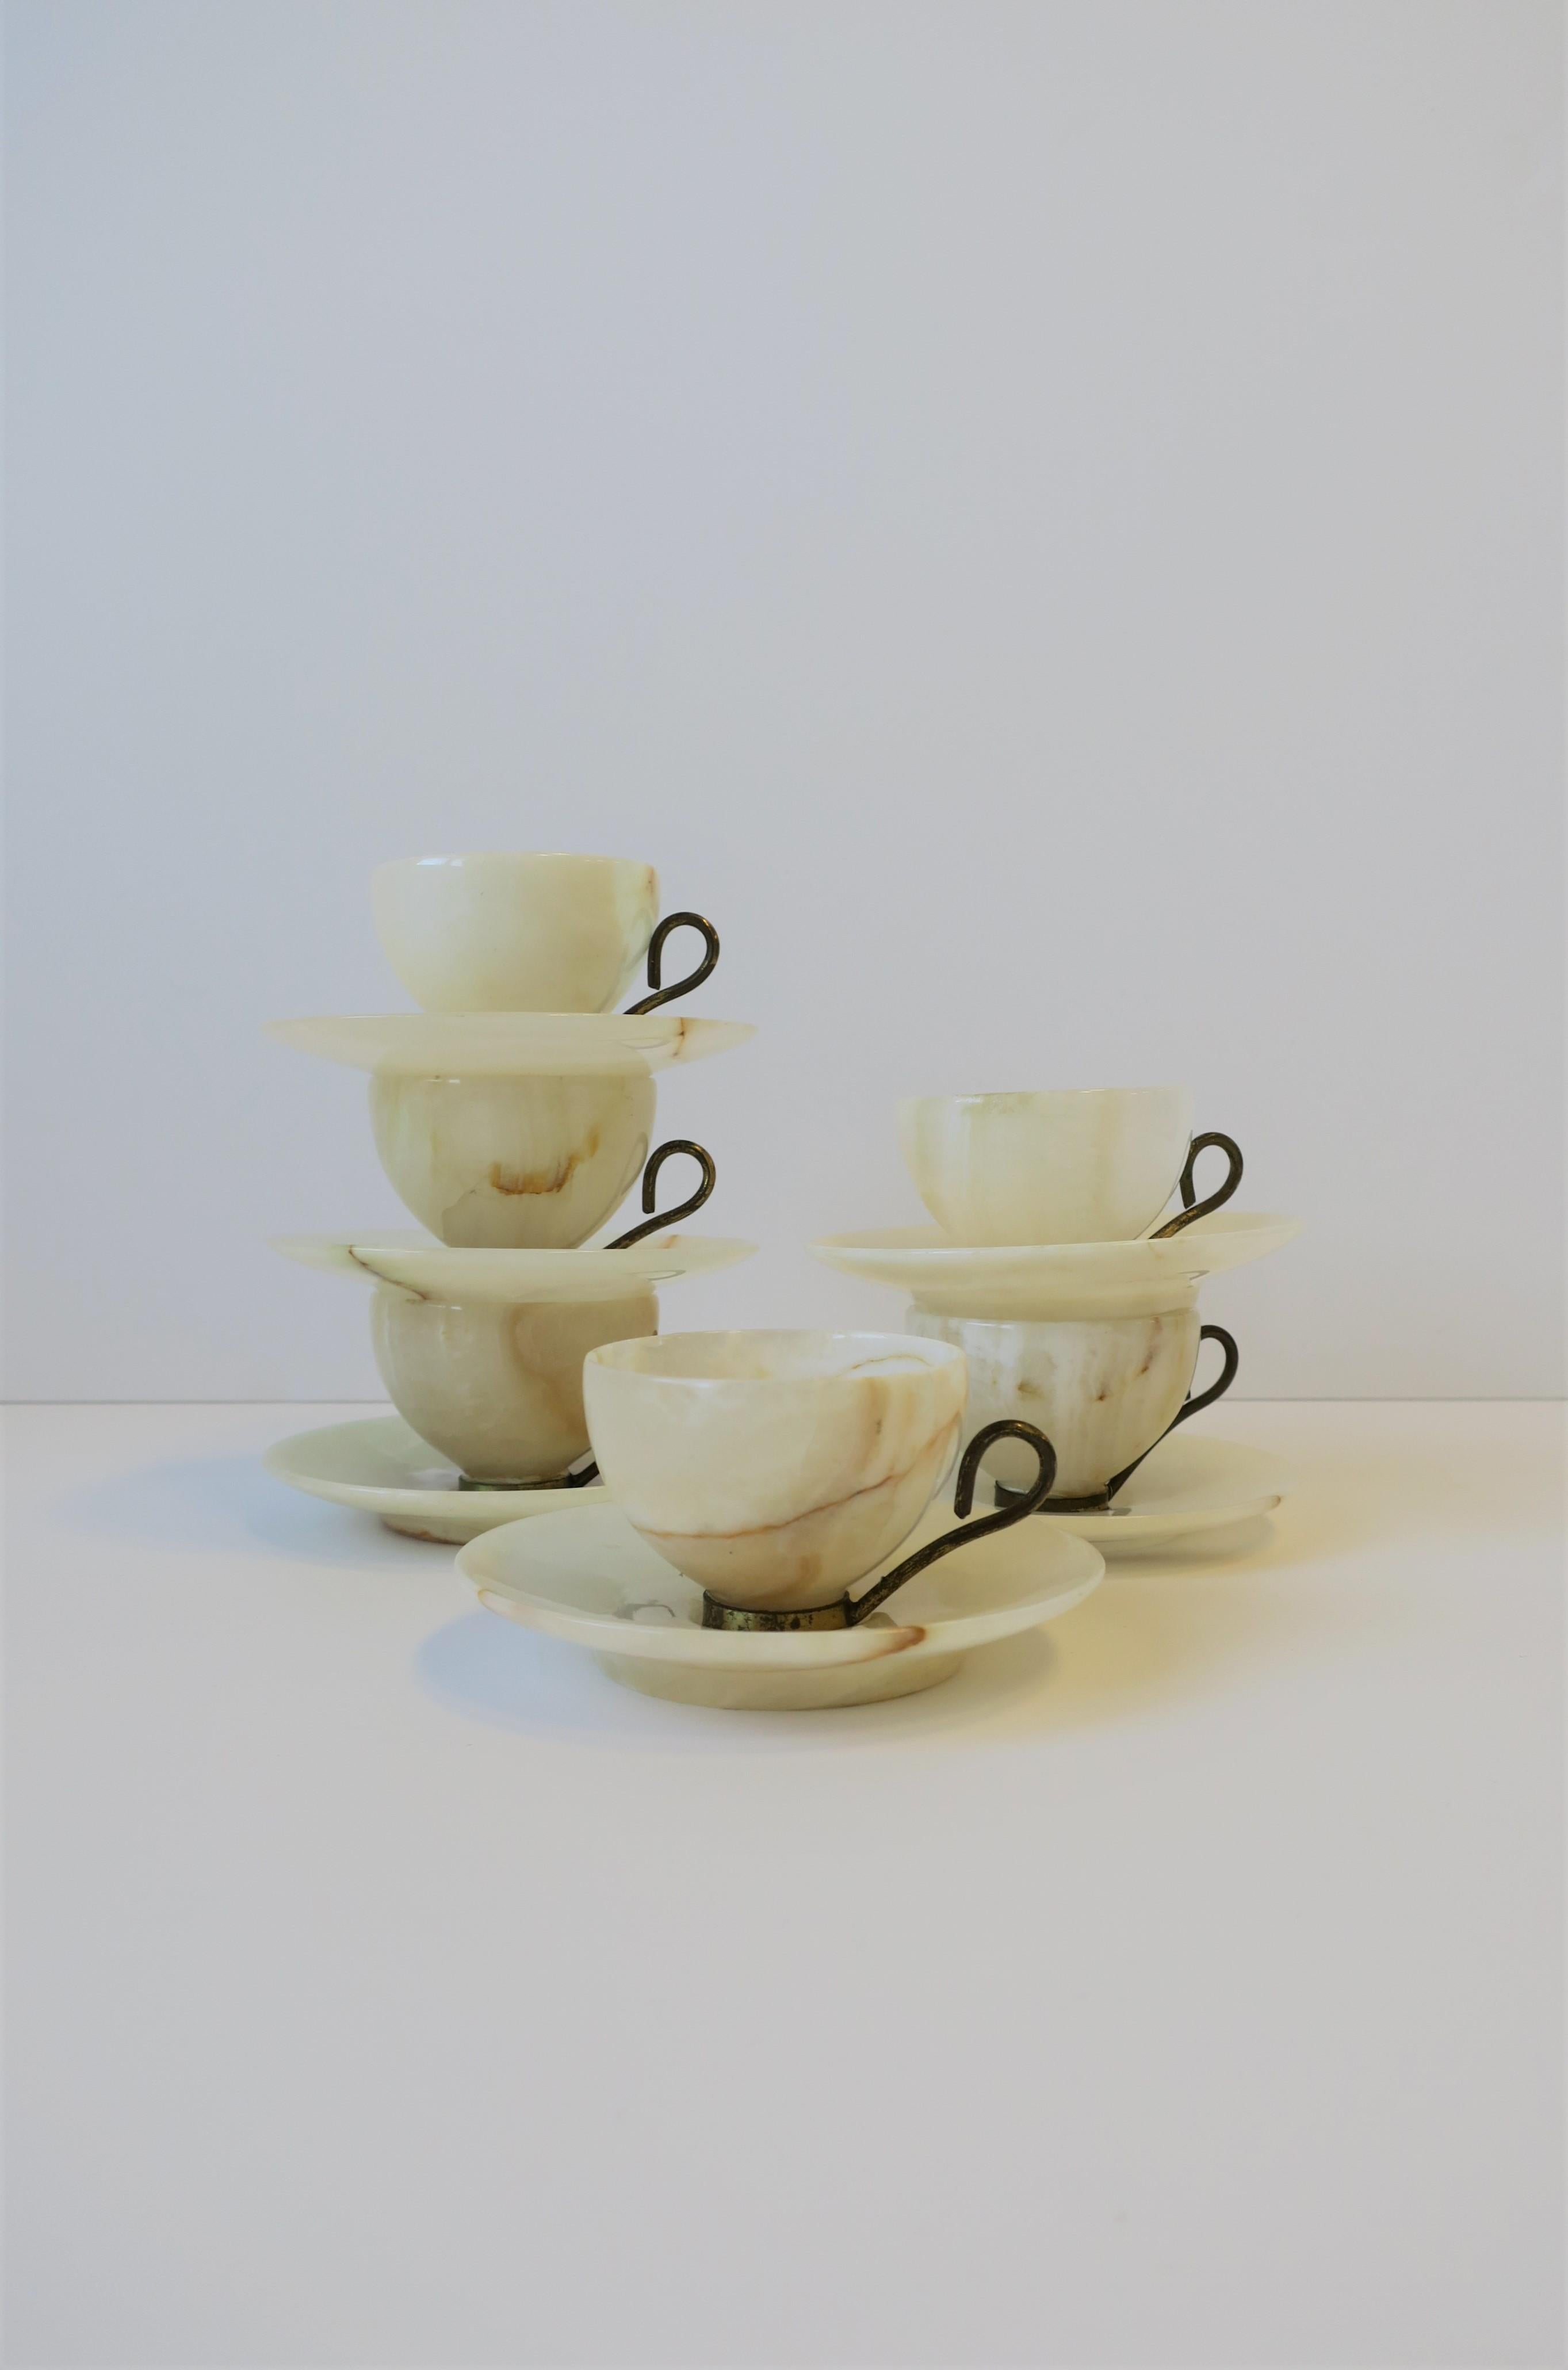 A beautiful set of six Italian onyx coffee or espresso cups and saucers with gold gilt metal handles and bases. Onyx is carved and polished smooth. Onyx hues are neutral tones; white, off-white, etc., circa 20th century, 1970s, Italy.

Measurements: